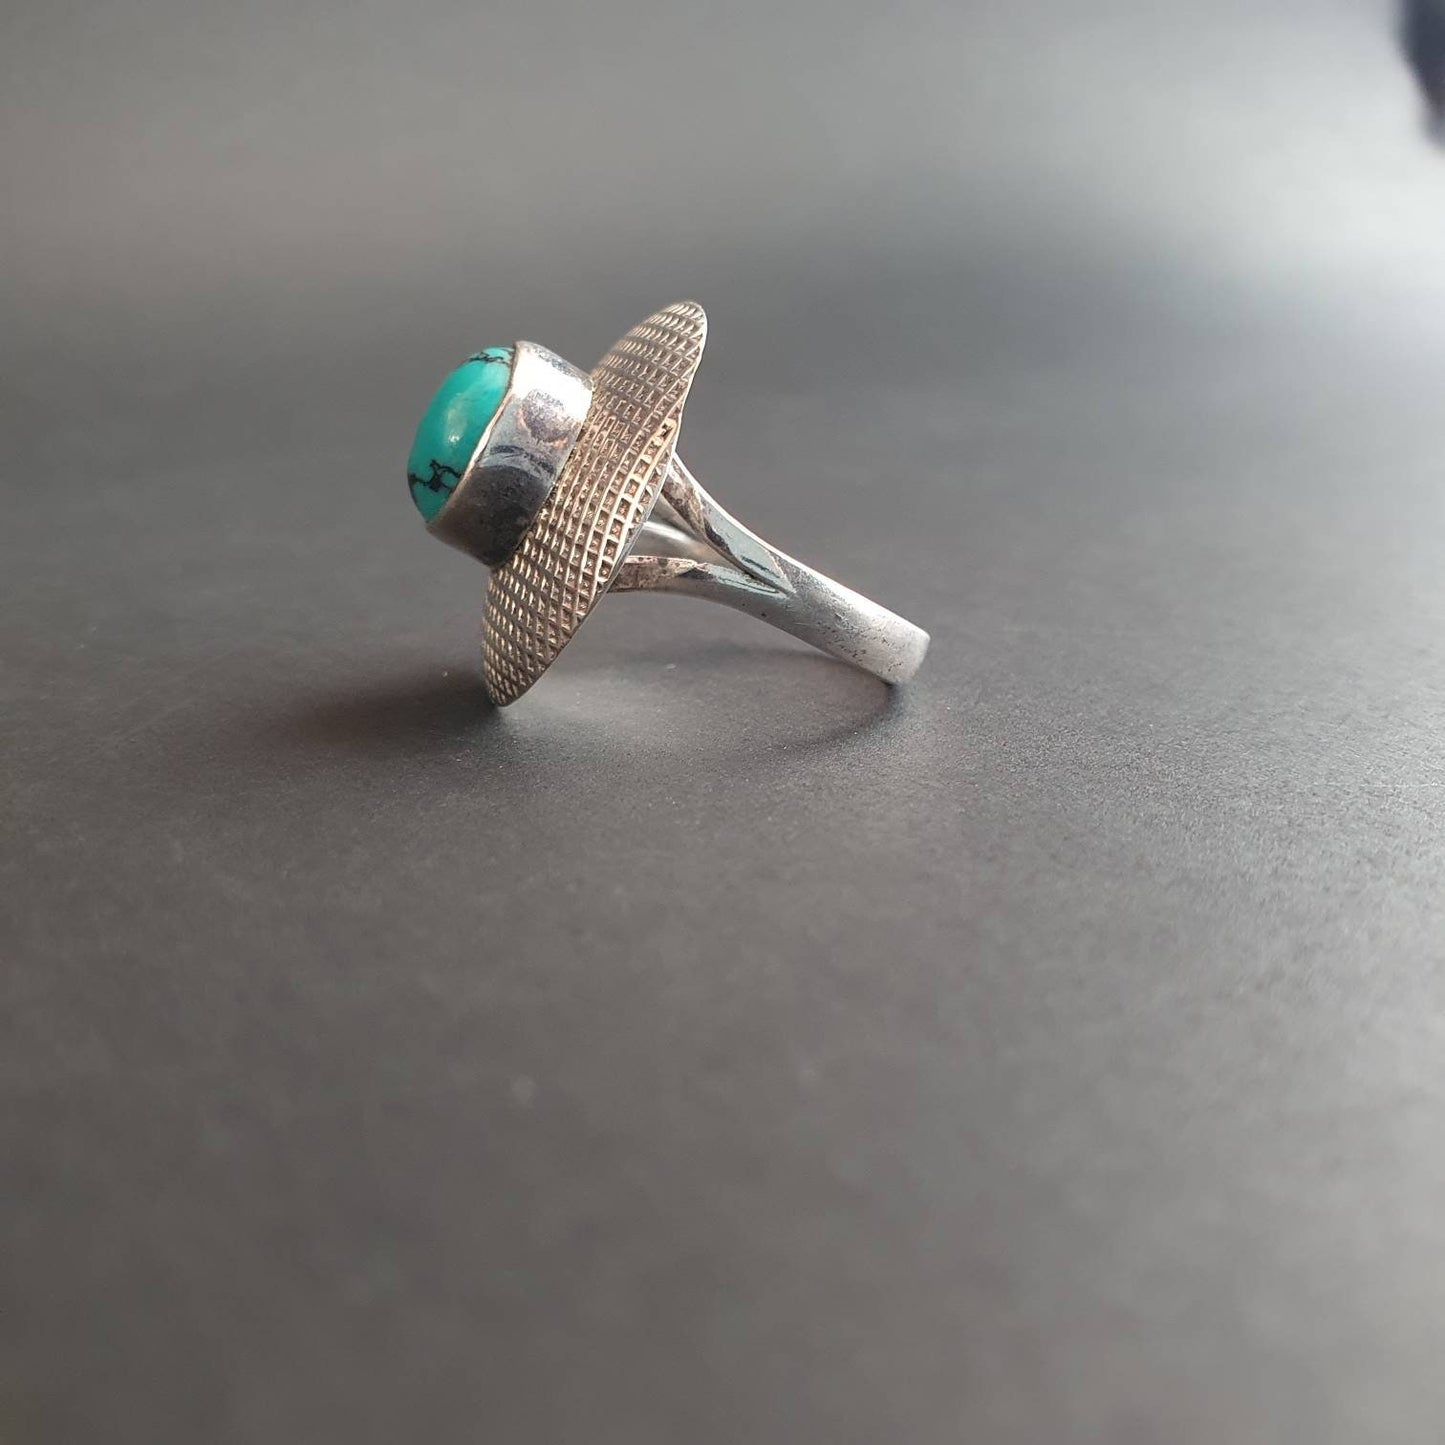 Turquoise Ring Solid 925 Sterling Silver Handmade Women New Jewelry, Unique Statement Gift, Round Shape